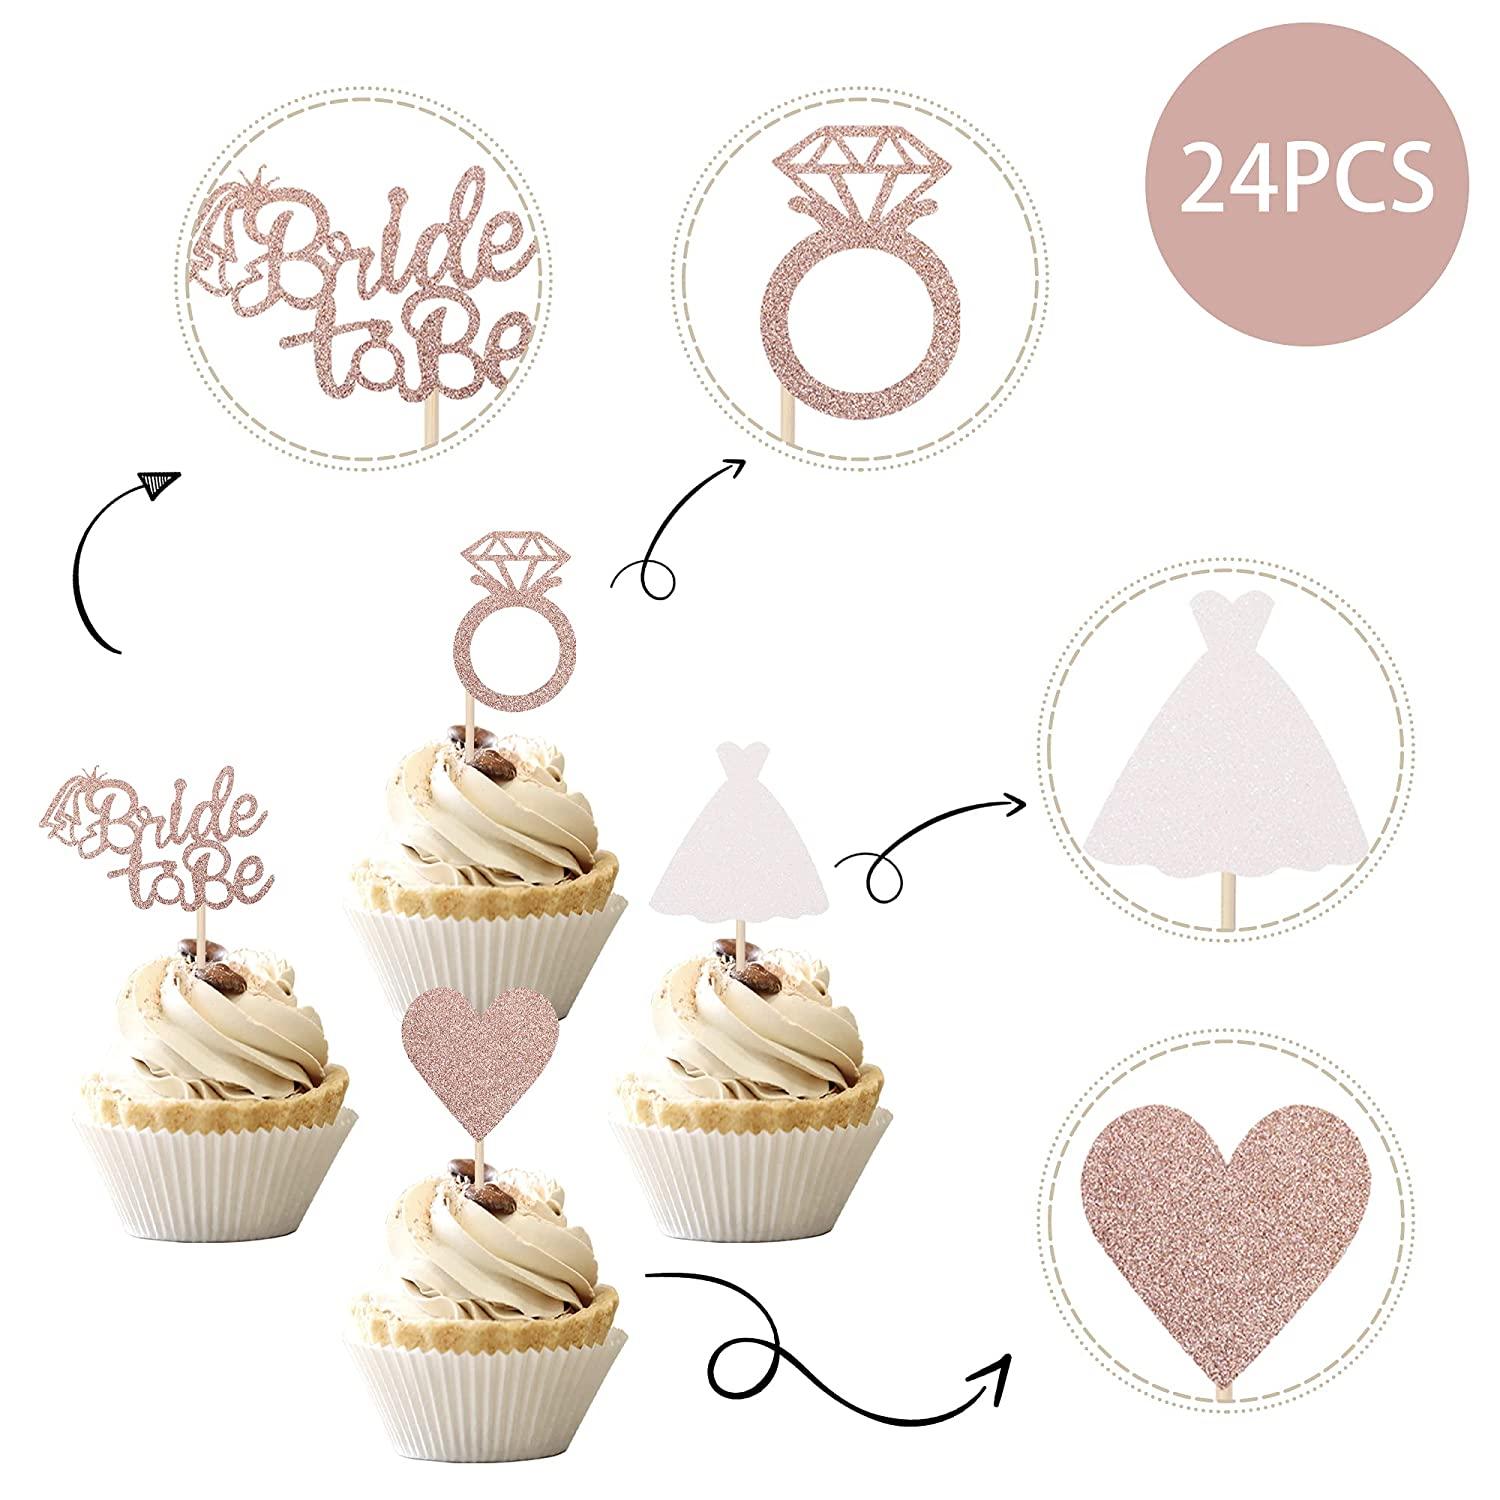 24 PCS Bride to Be Cupcake Toppers with Heart Ring Dress Bridal ...